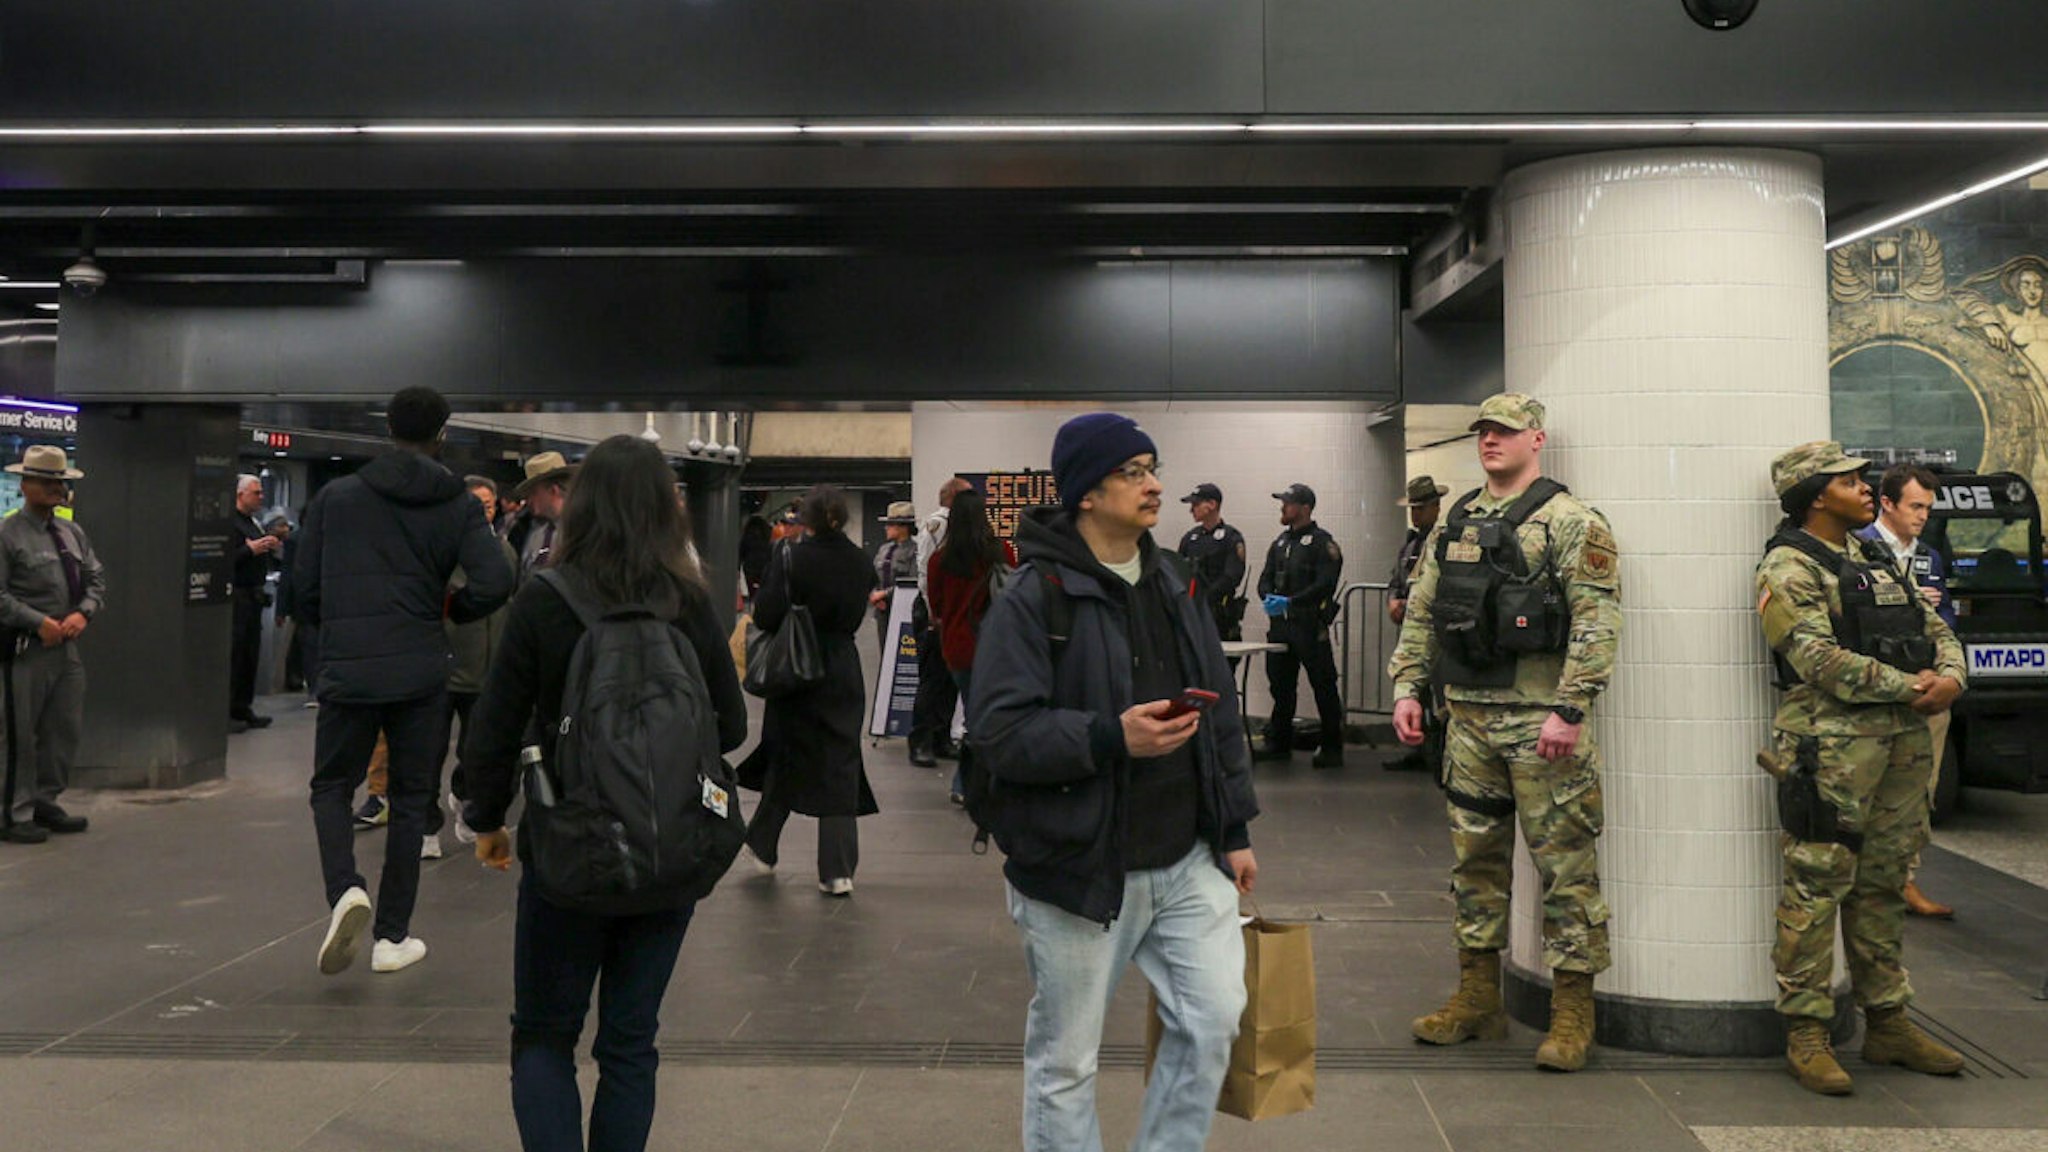 NEW YORK, US - MARCH 7: Security forces, including National Guard troops and police, take security measures at a subway station in New York, United States on March 07, 2024. US National Guard deployed 750 National Guard troops and additional 250 state troopers to combat rising crime in NYC subways, Governor Kathy Hochul announced in a press conference on Wednesday.